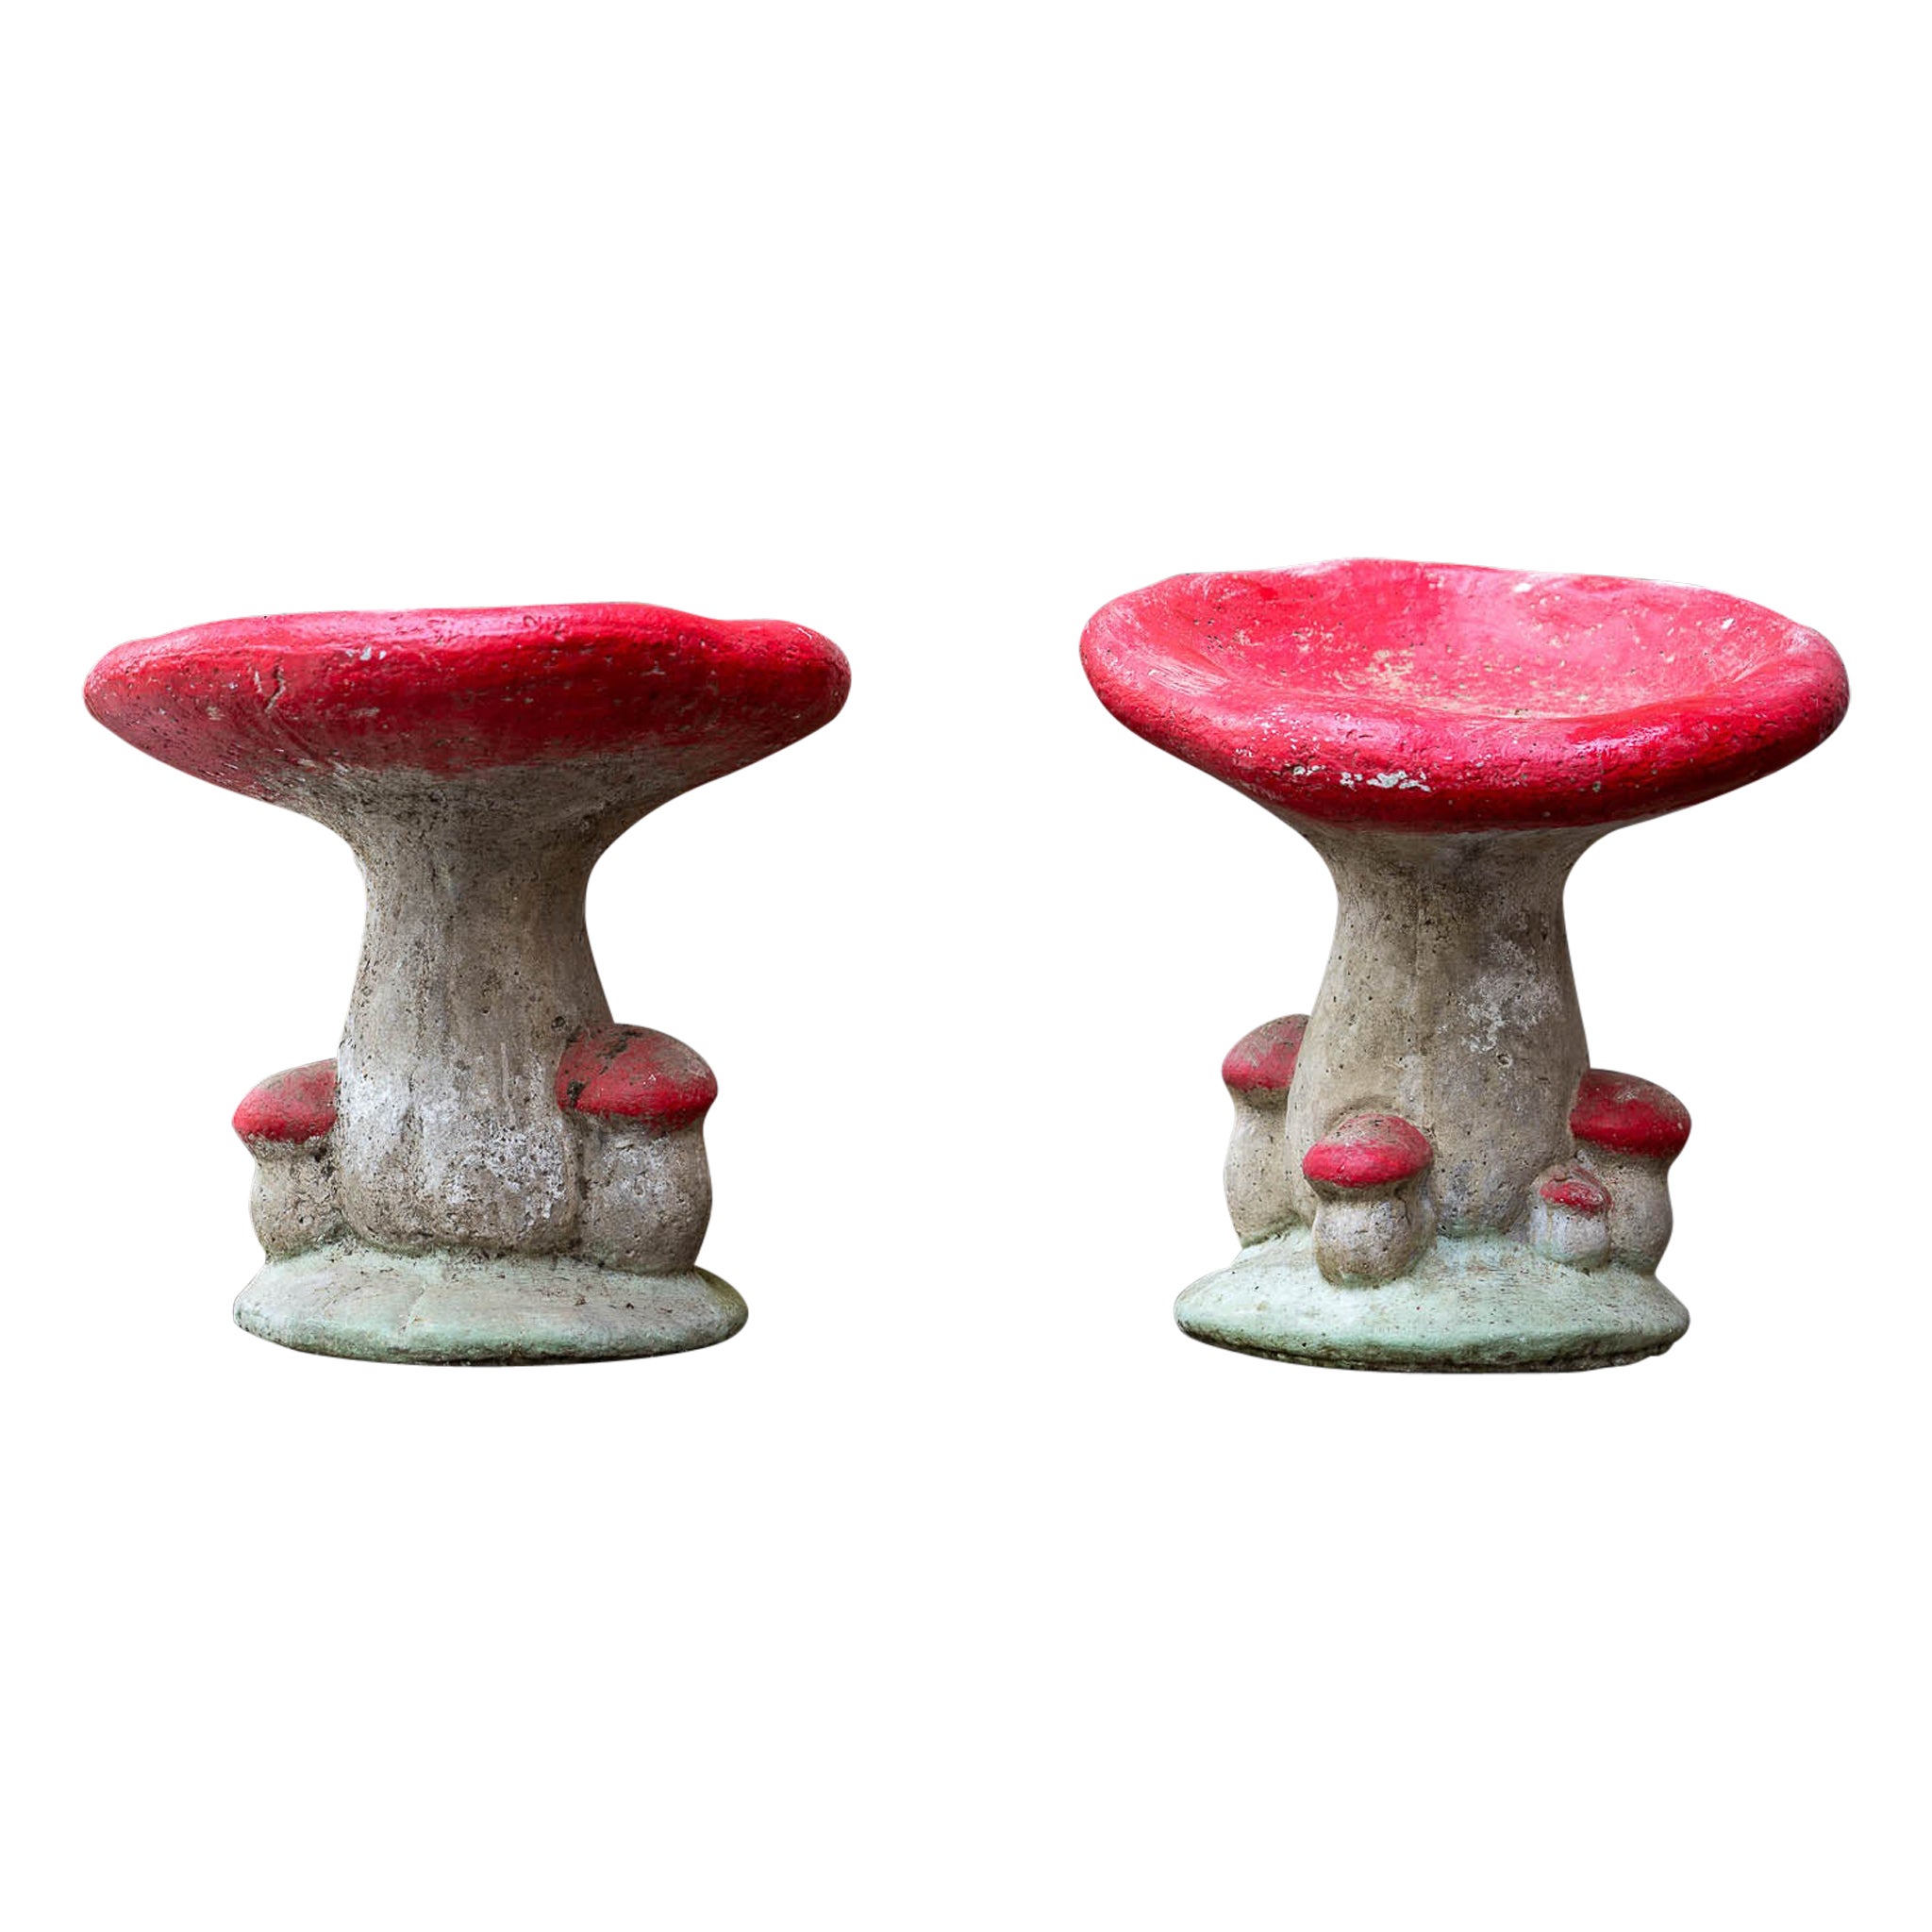 A couple of concrete Red Vintage Garden Mushrooms shaped stools with patina.